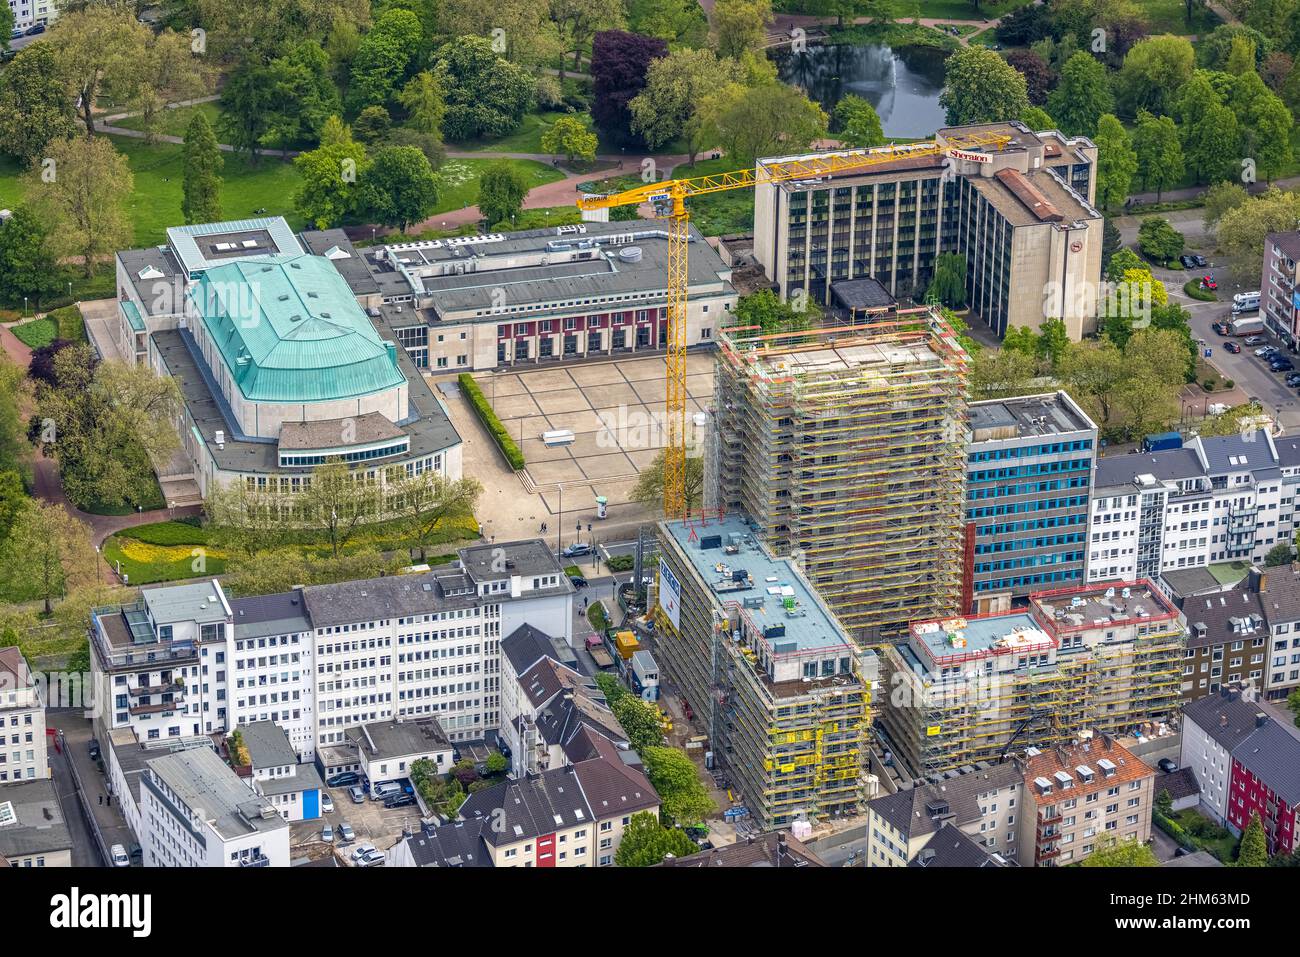 Aerial view, Philharmonie Essen at Huyssenallee, construction site new building complex with residential tower and senior flats Huyssenallee, Essen, R Stock Photo